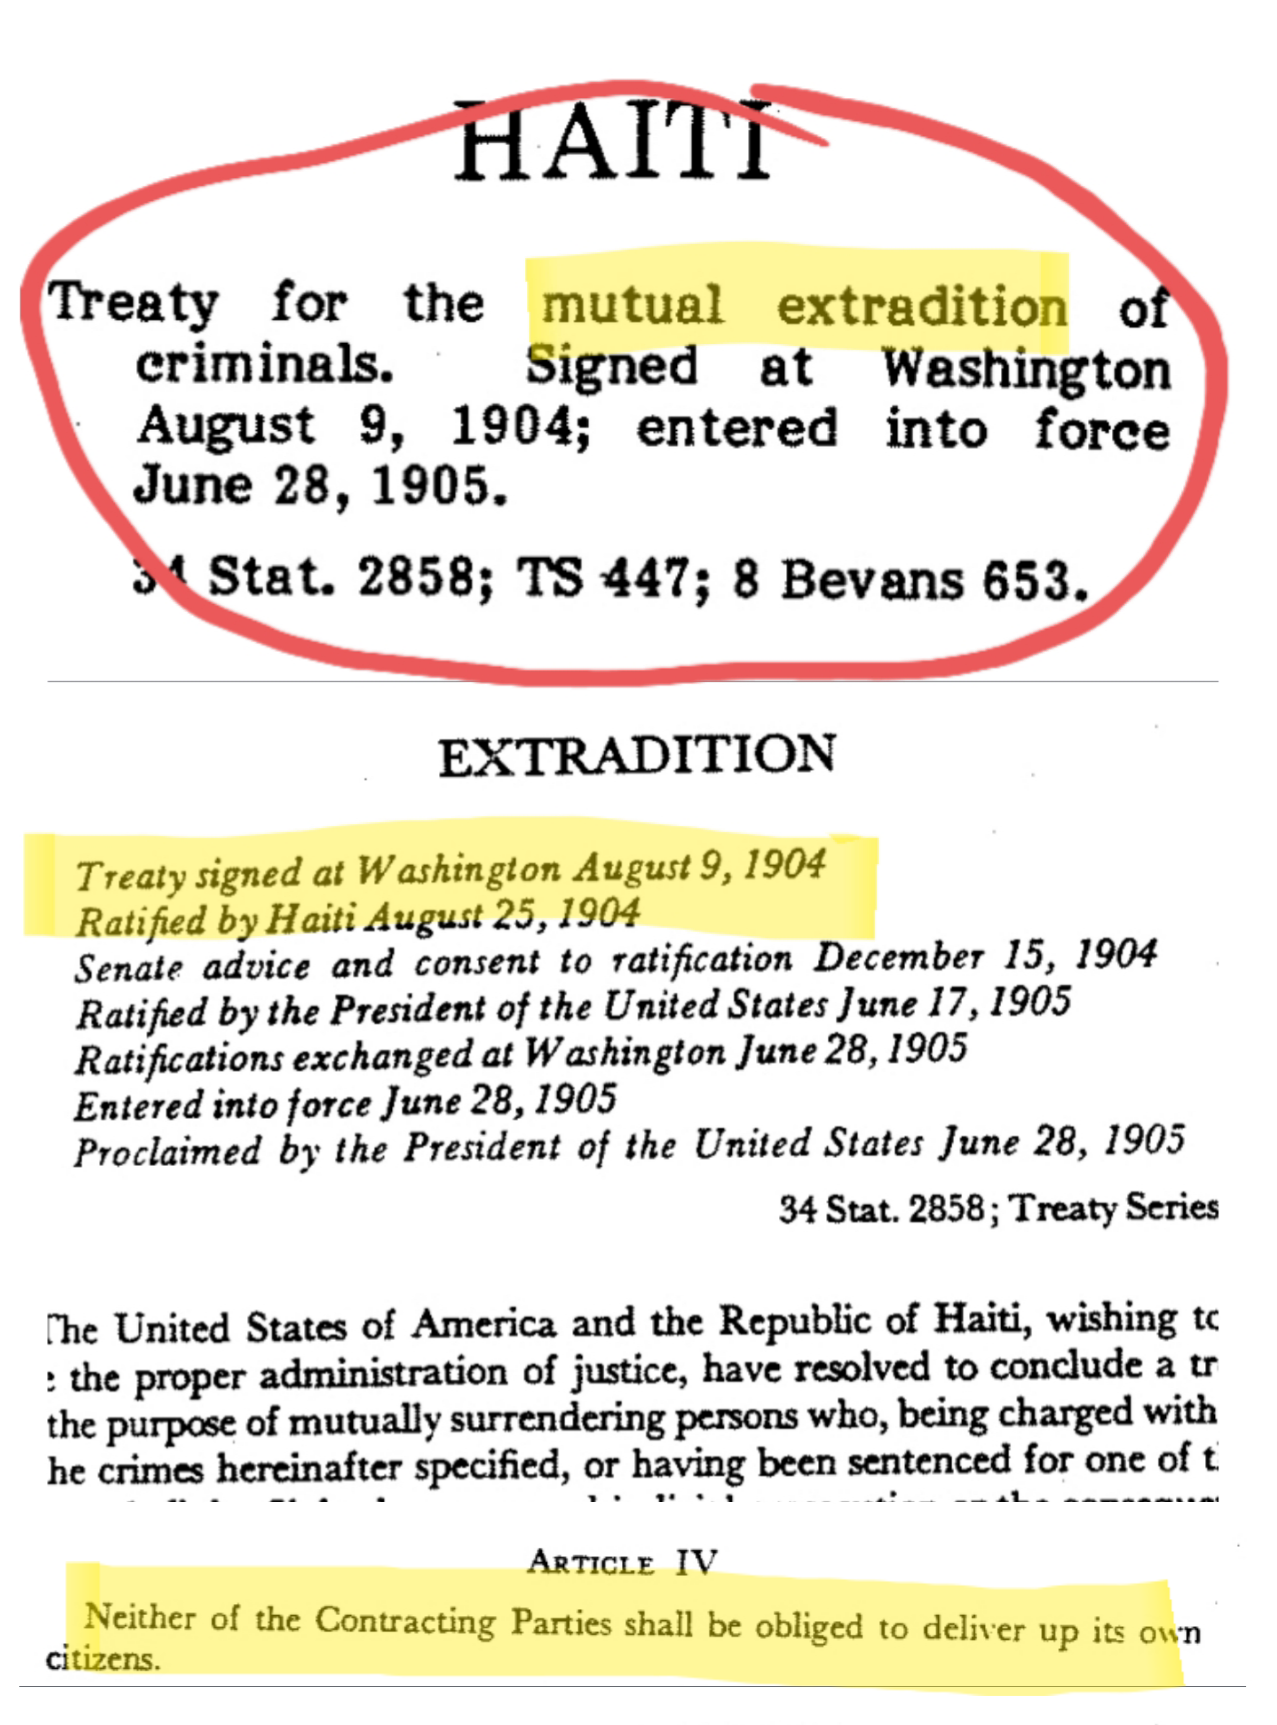 Copy of the extradition treaty between Haiti and the United States